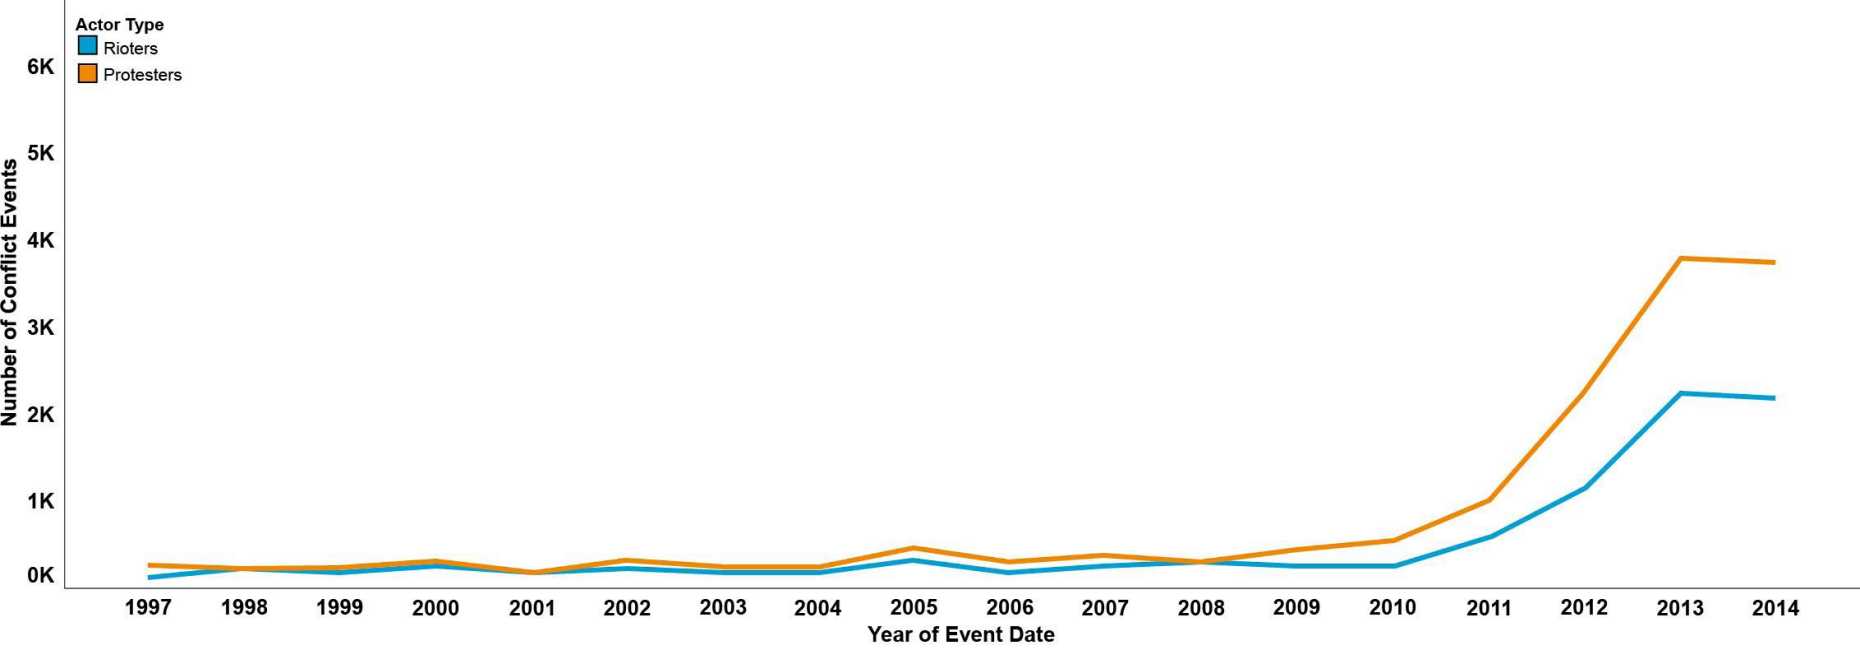 Riots and protests in Africa (1997-2014)